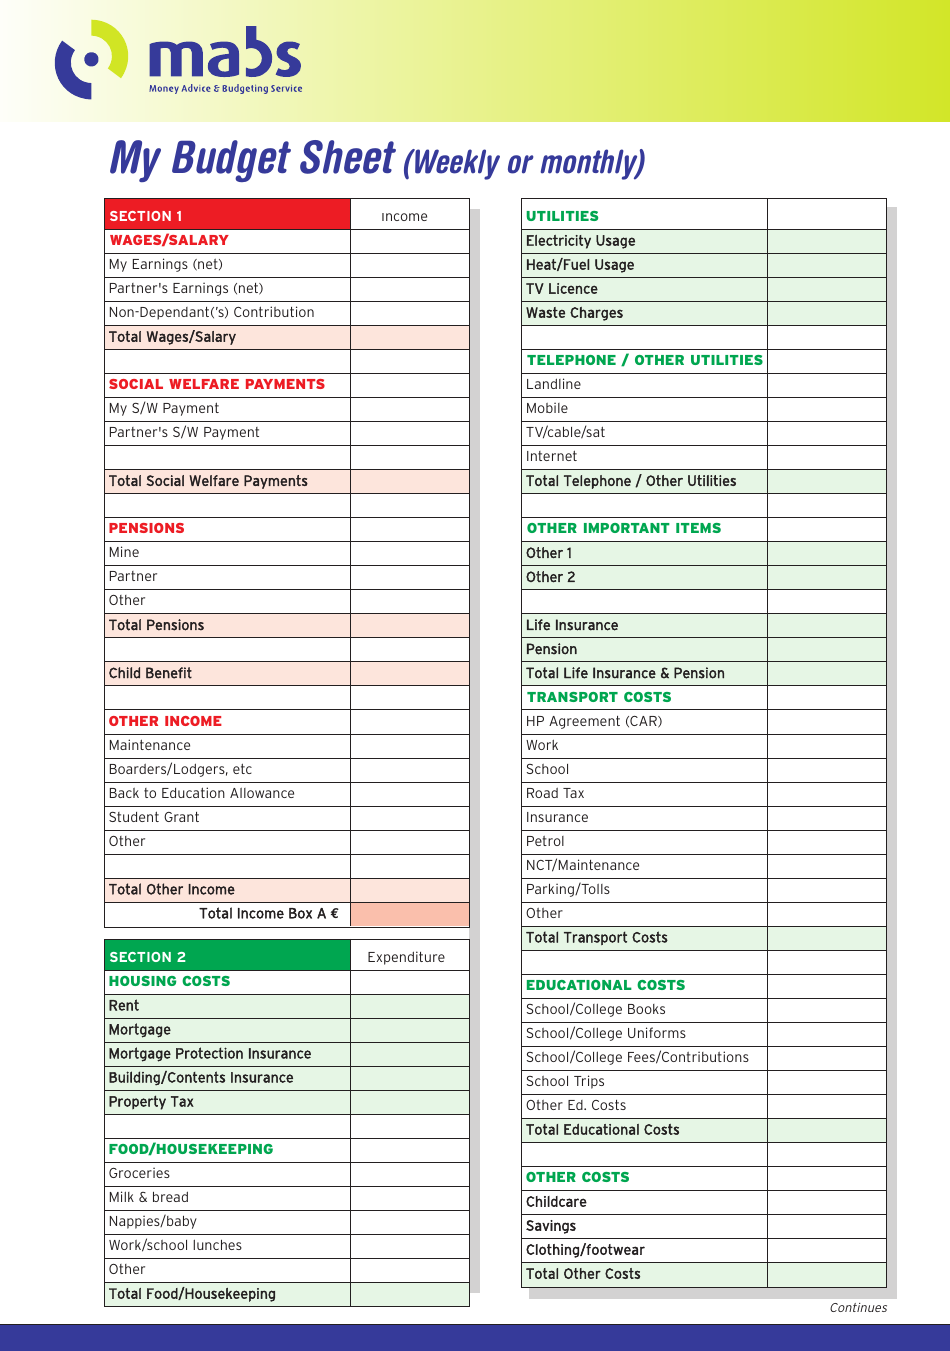 Budget Sheet Template (Euro), Page 1